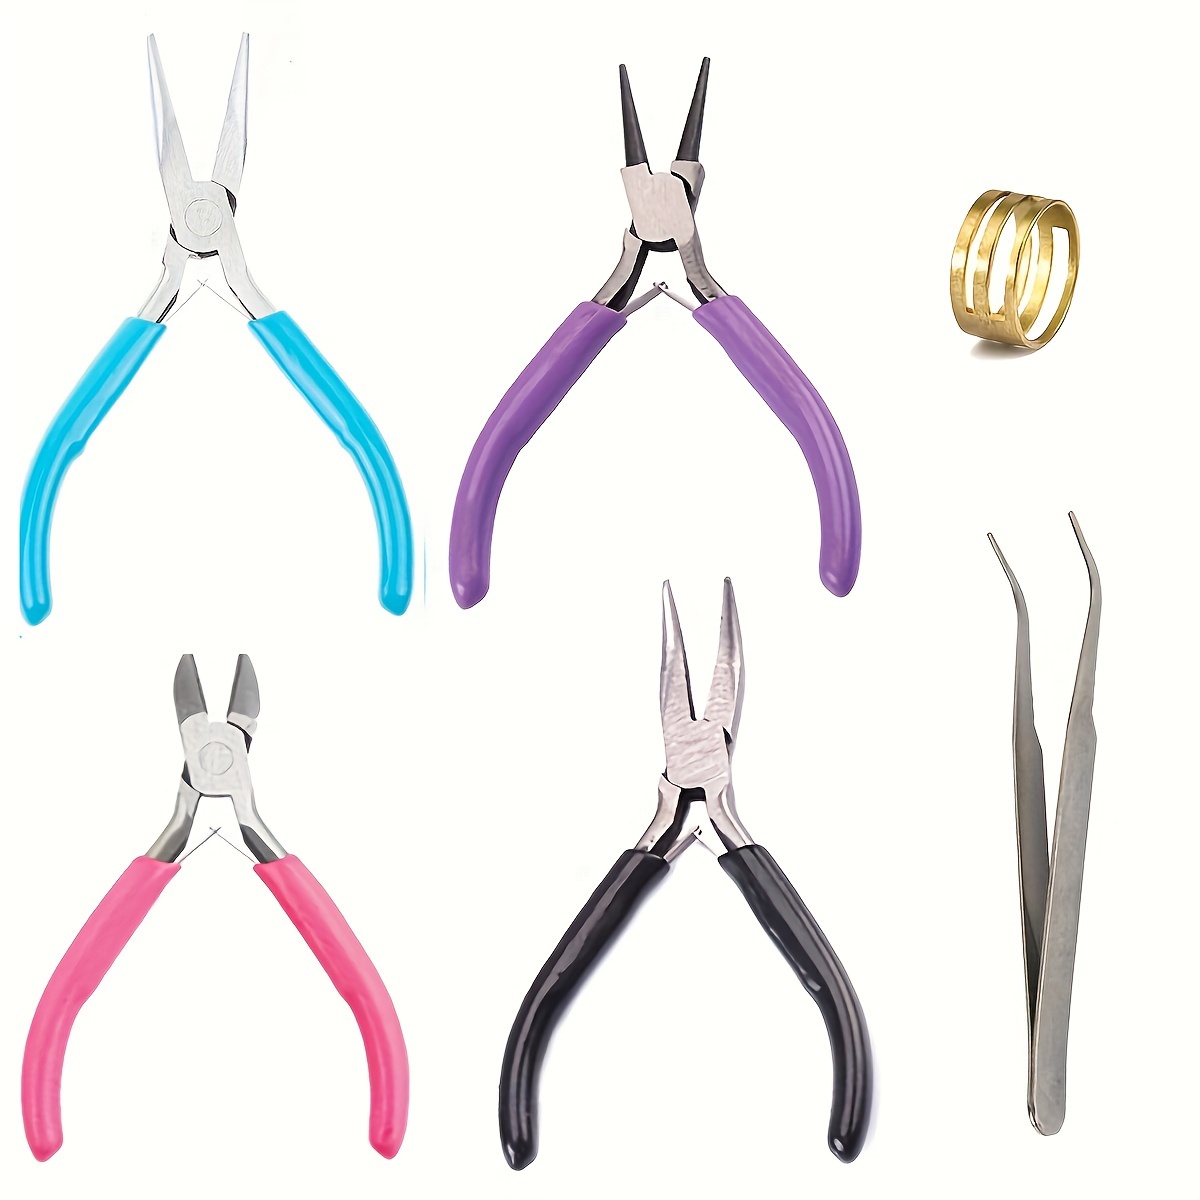 

6pcs/set Diy Hand-operated Pliers, 4 Tweezers, 1 Golden Ring Opening Tool, Can Be Used To Make And Repair Various Jewelry Accessories